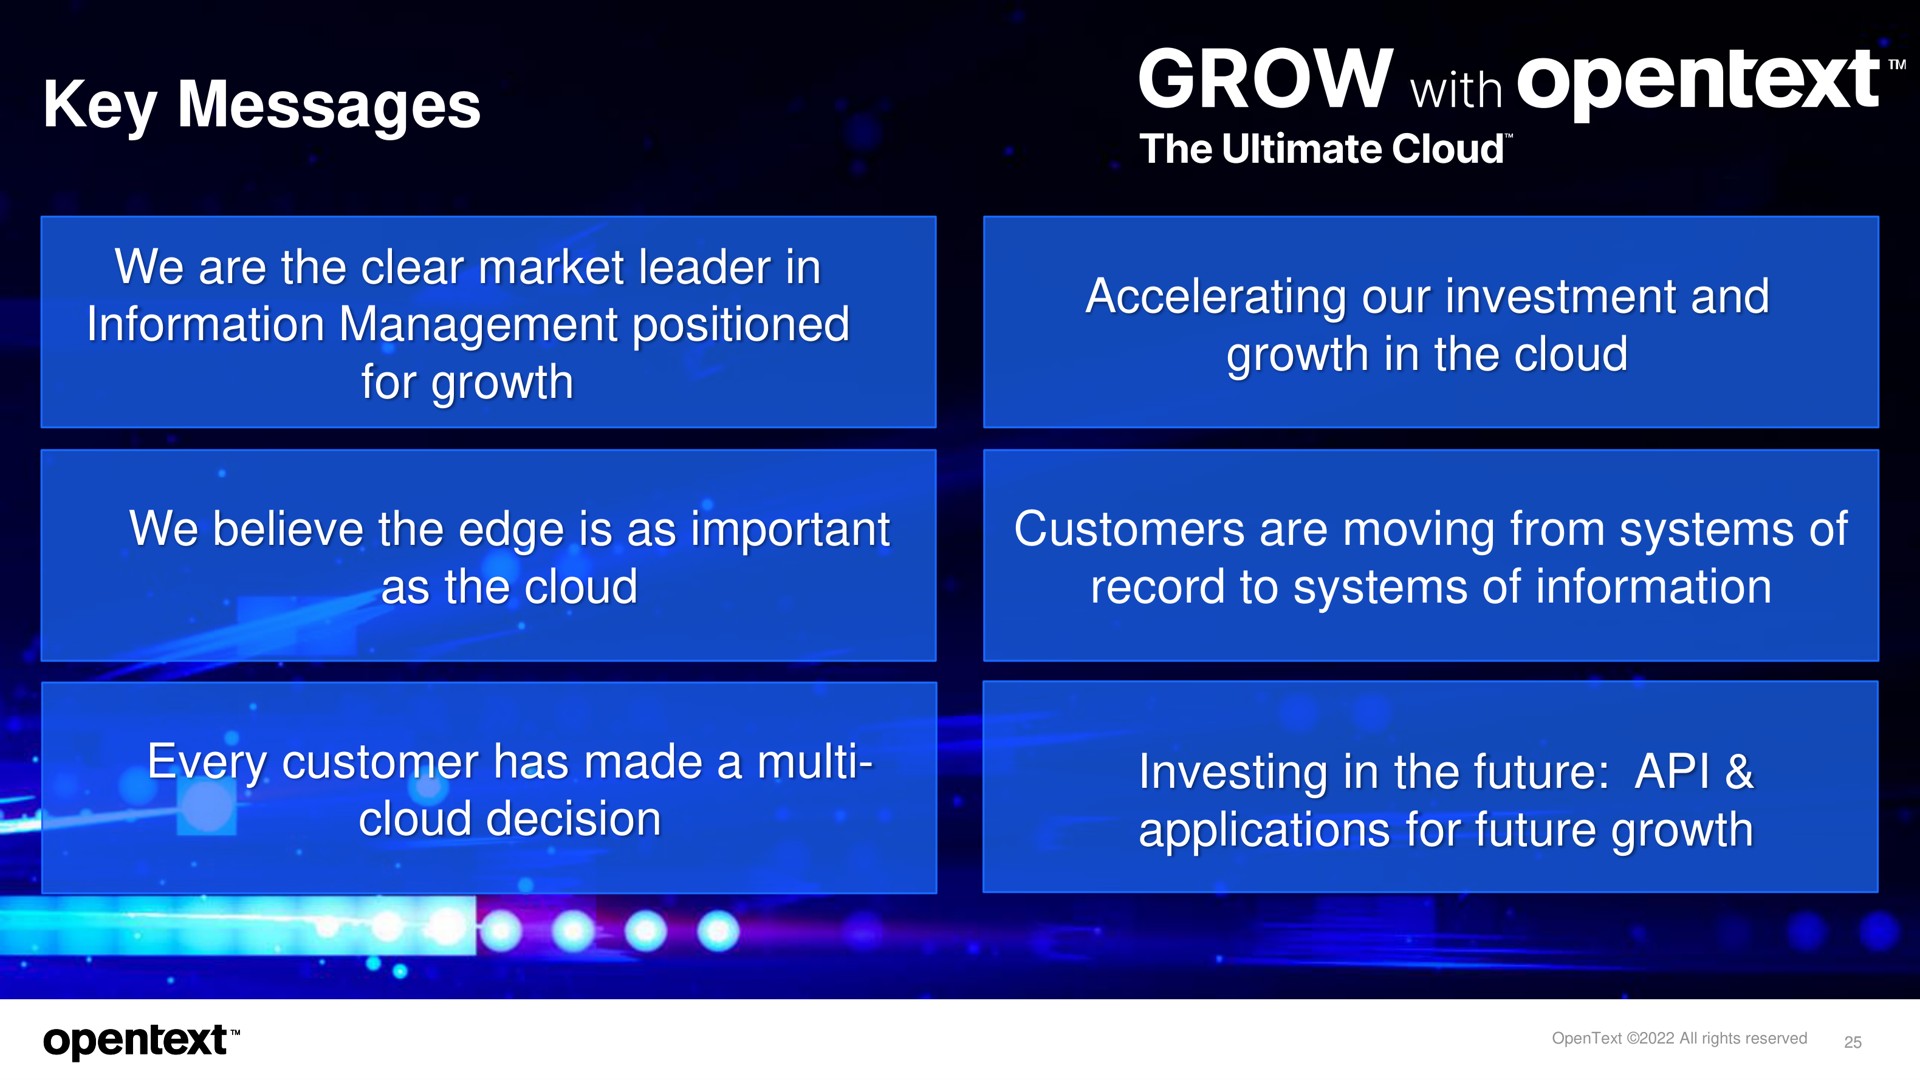 key messages grow with every customer has made a cloud decision investing in the future applications for future growth | OpenText